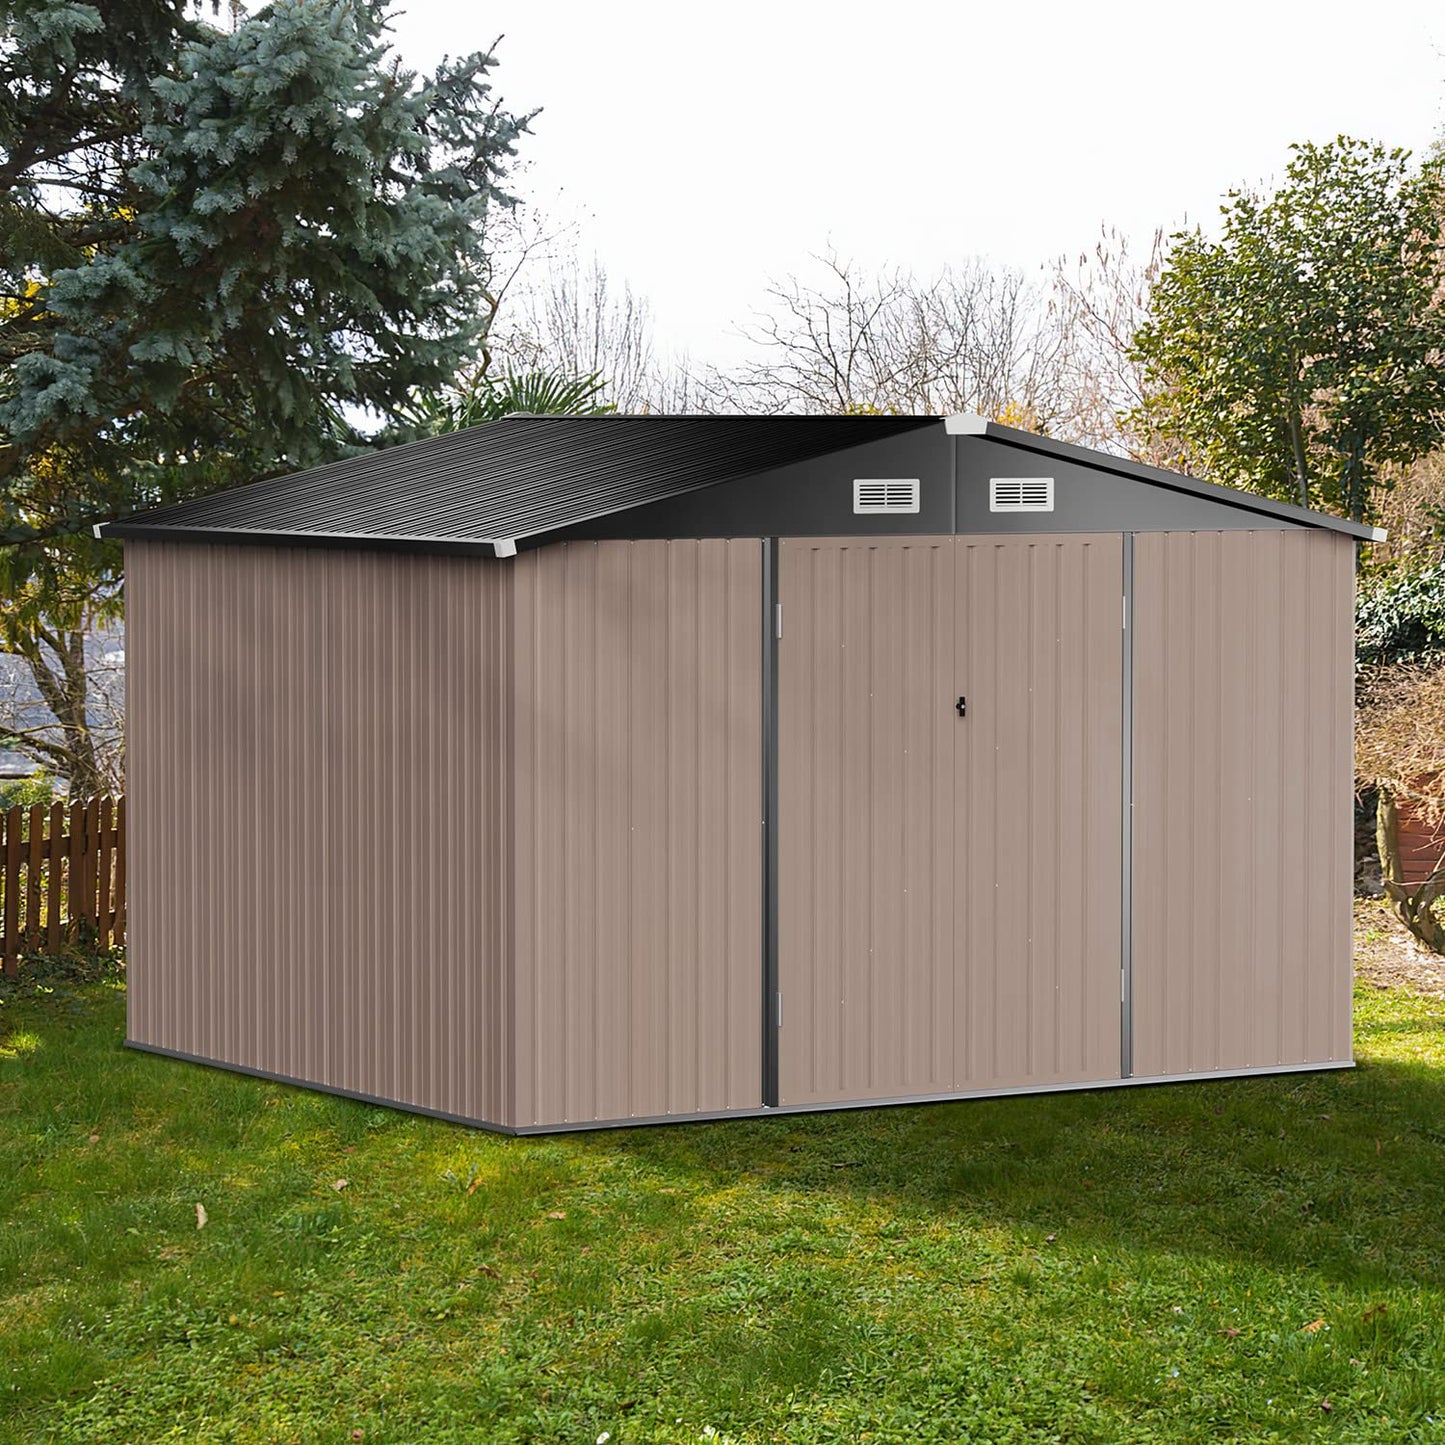 Breezestival Outdoor Storage Shed 8x10 FT, Utility Steel Tool Shed with Lockable Door and Air Vents, Galvanized Metal Shed for Garden Backyard Patio Lawn (8' x 10') 8 x 10'